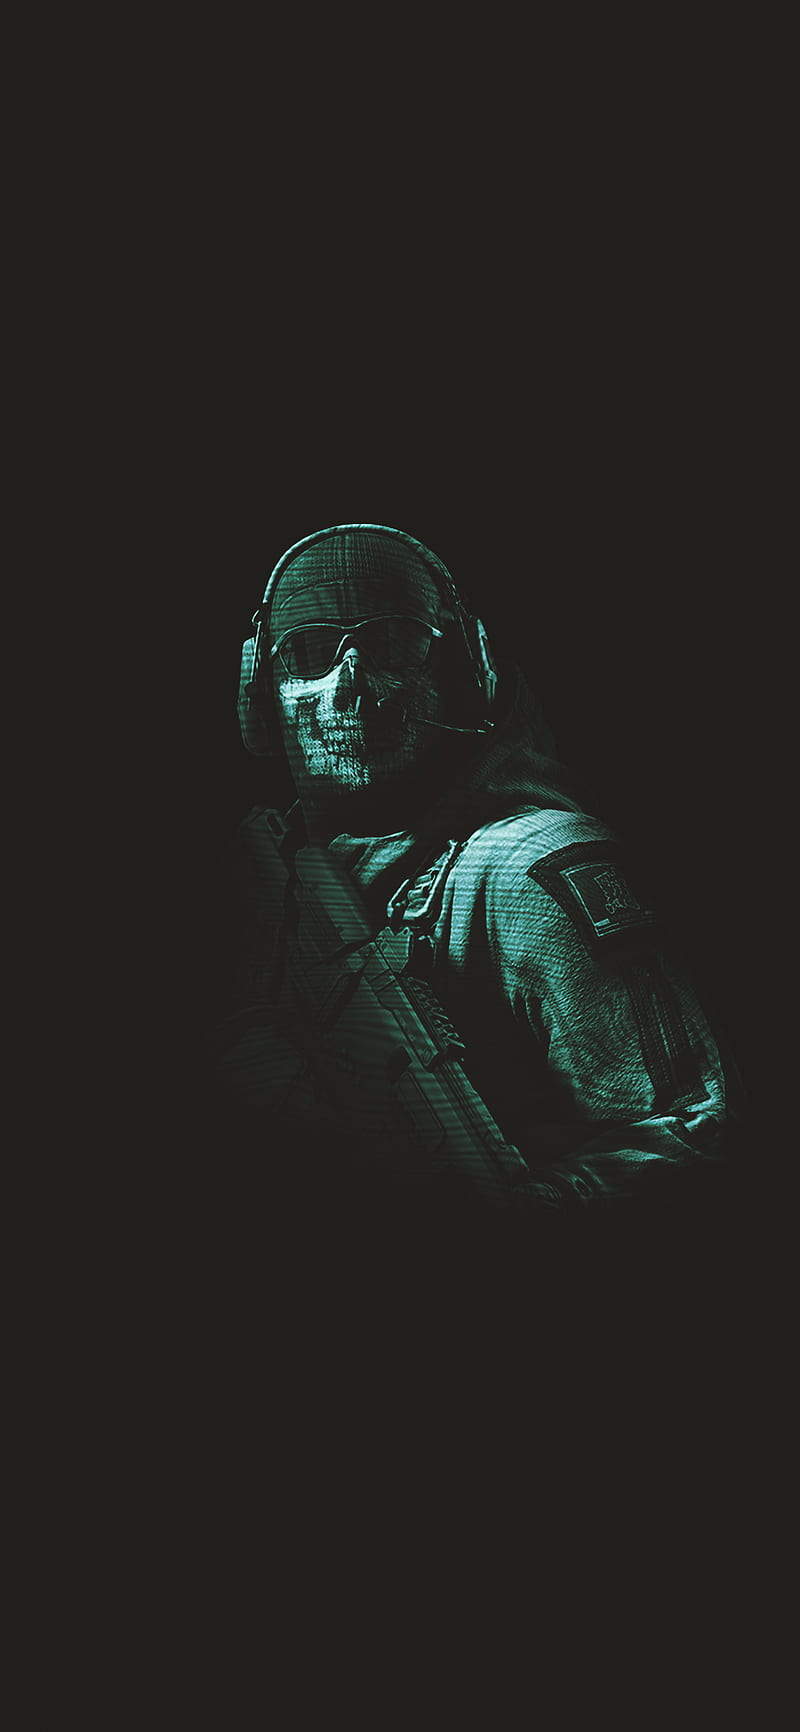 Call of Duty Ghosts Wallpapers 1920x1080 in HD  Call of Duty Ghosts  Call  of duty ghosts Call of duty Call of duty black